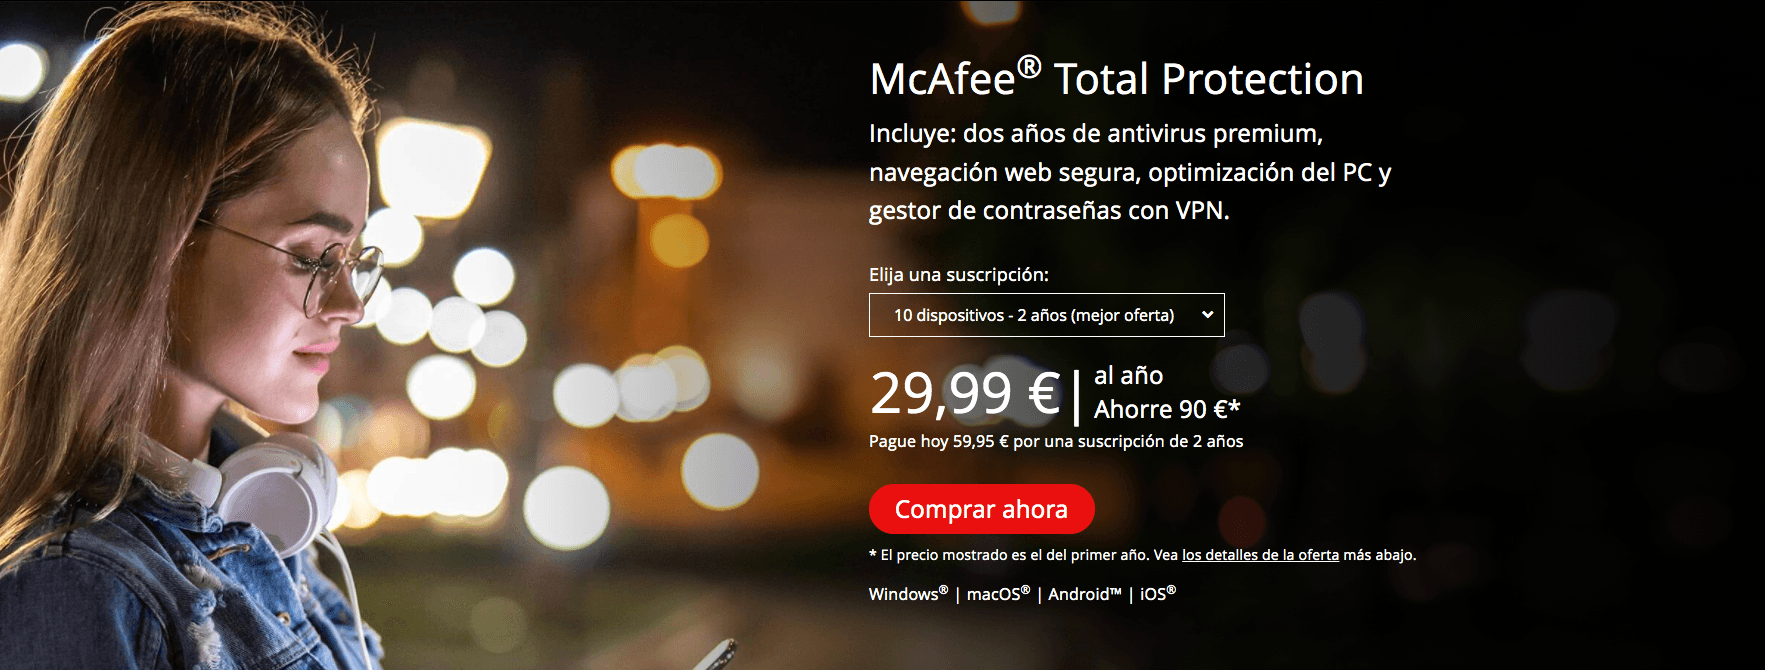 mcafee Total protection